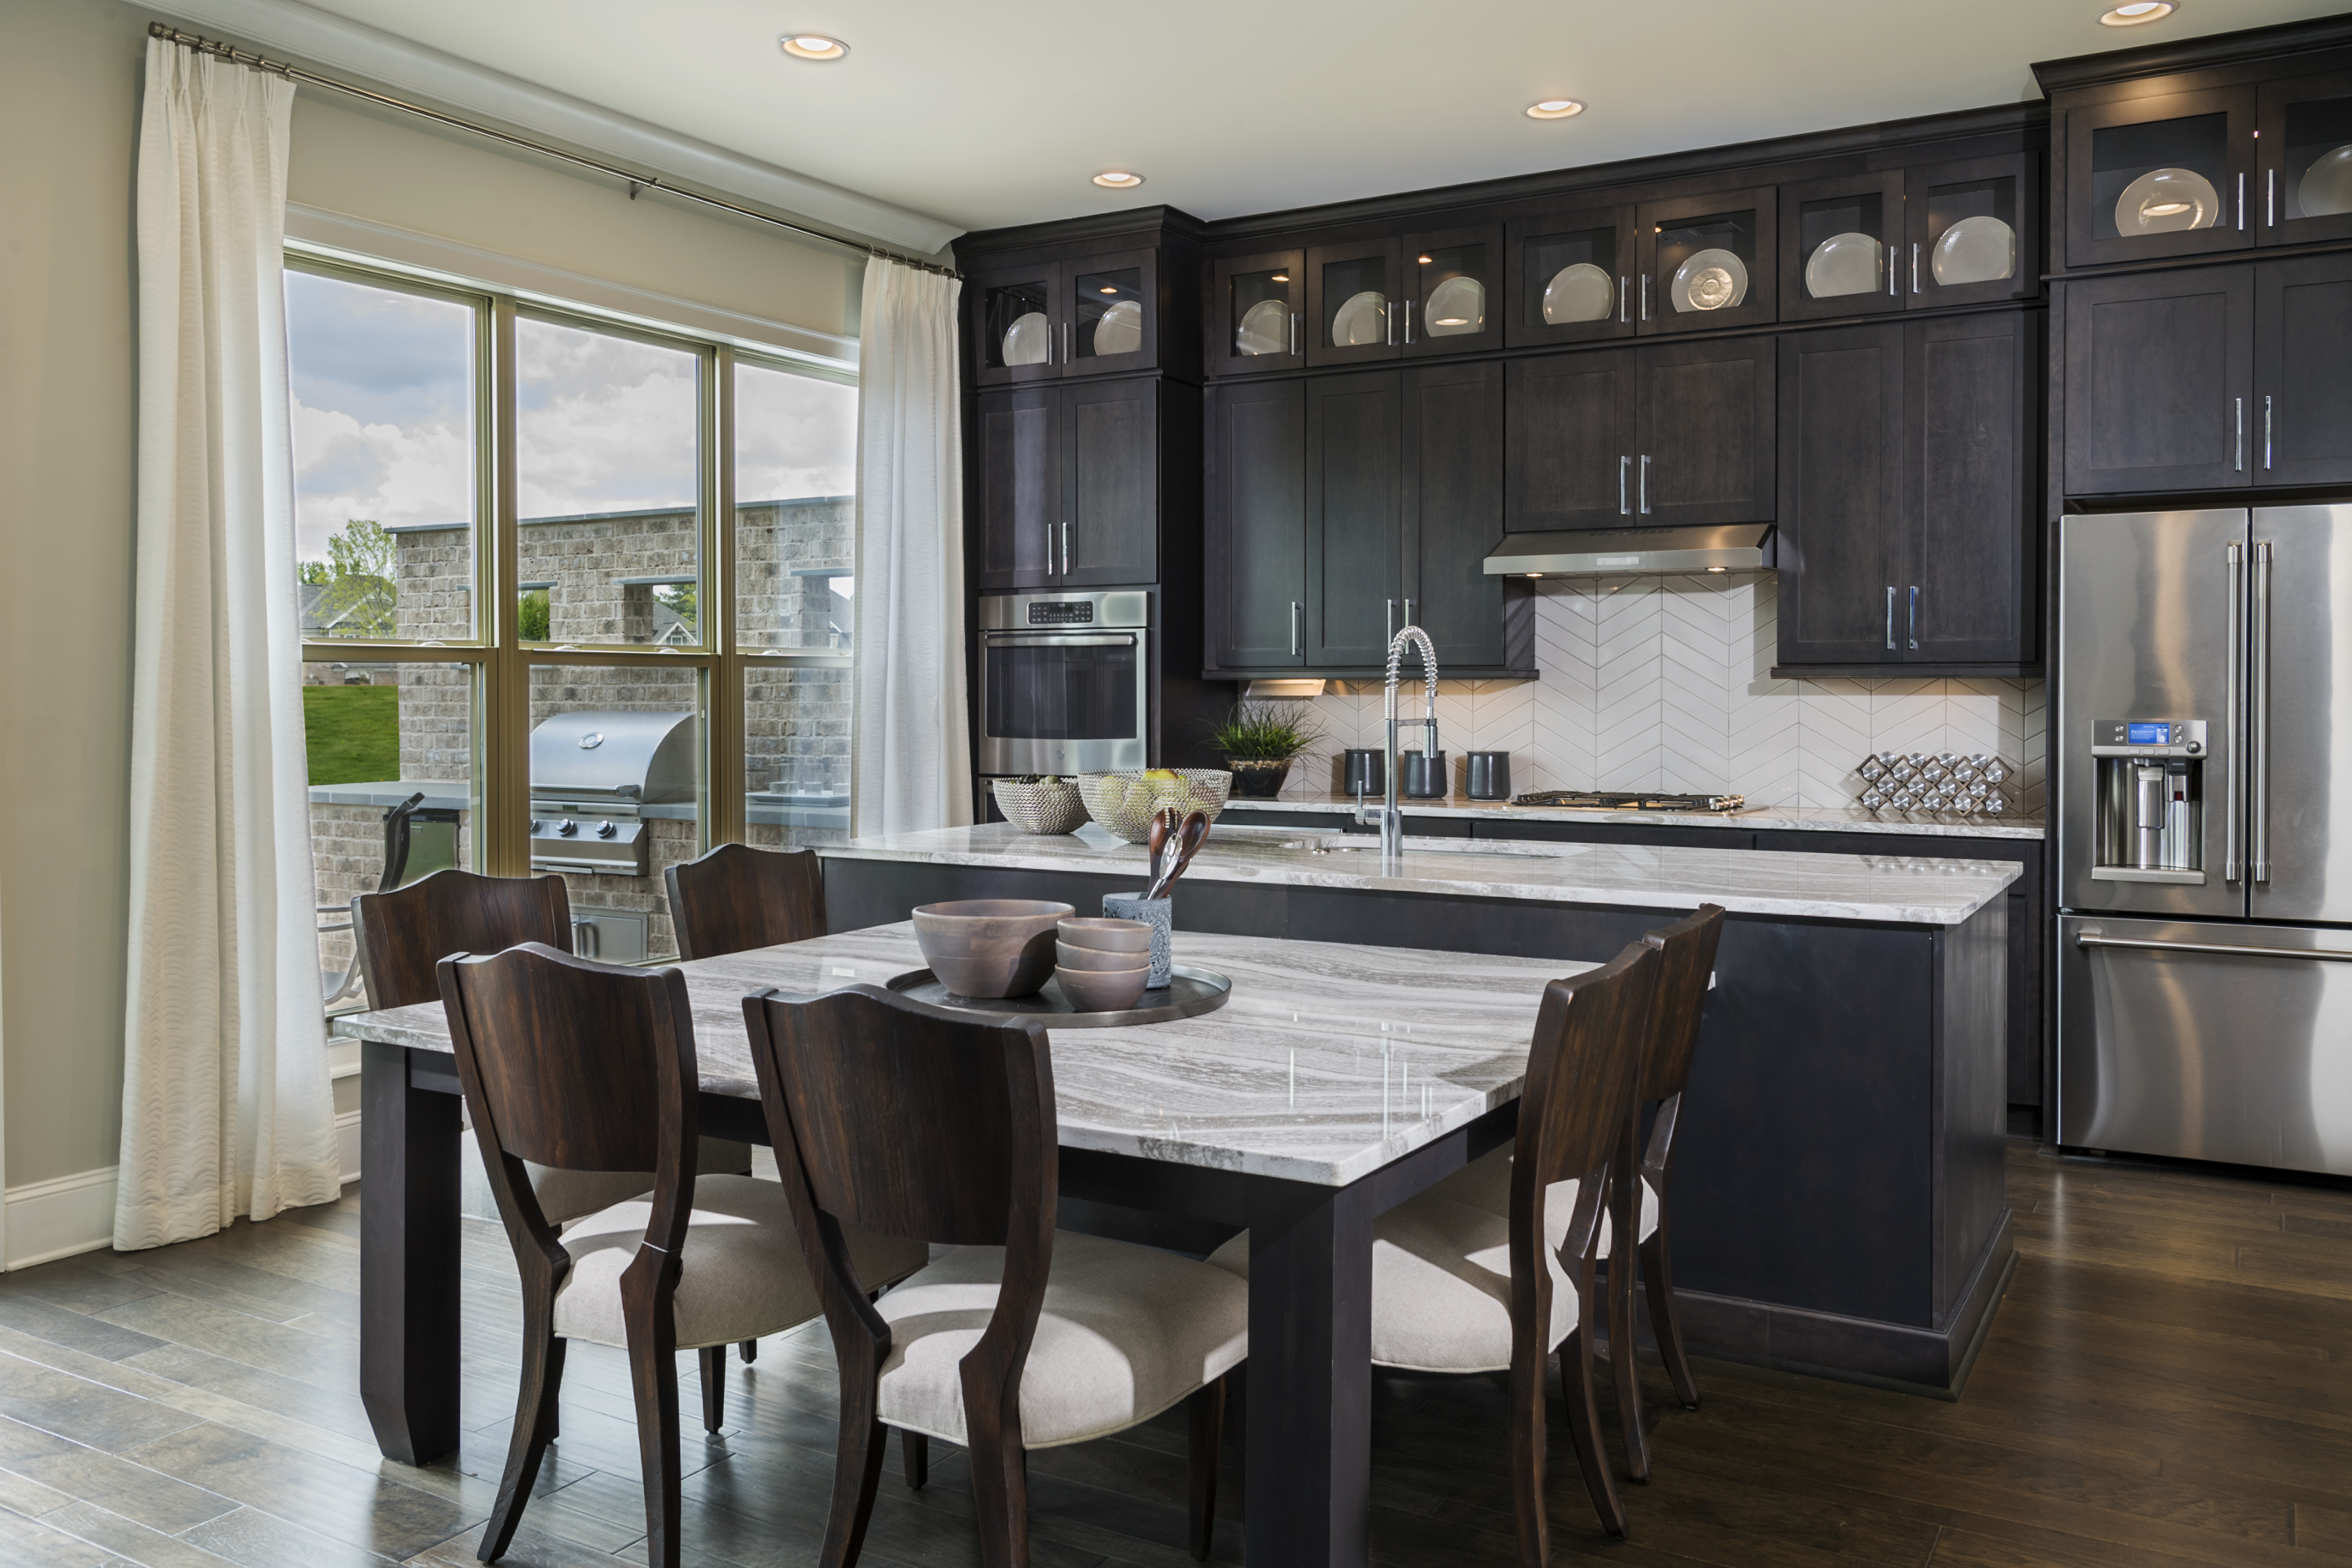 Project Focus: New Johns Creek Decorated Model Home